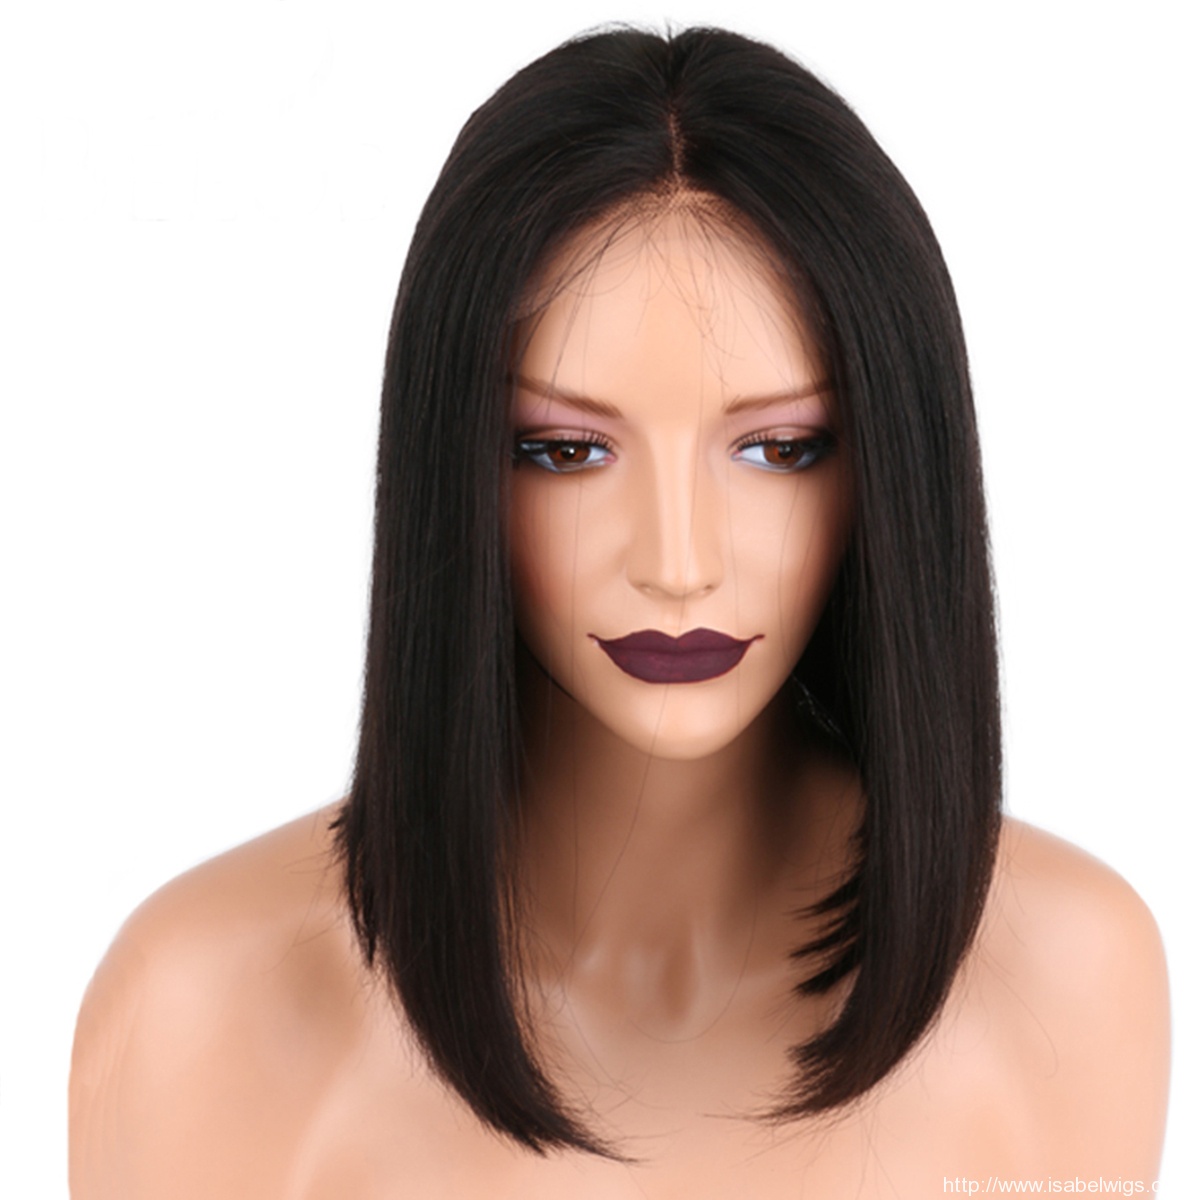 ISABEL Short Bob Straight Full Lace Human Hair Wigs Glueless Brazilian Hair Lace Wig For Black Women